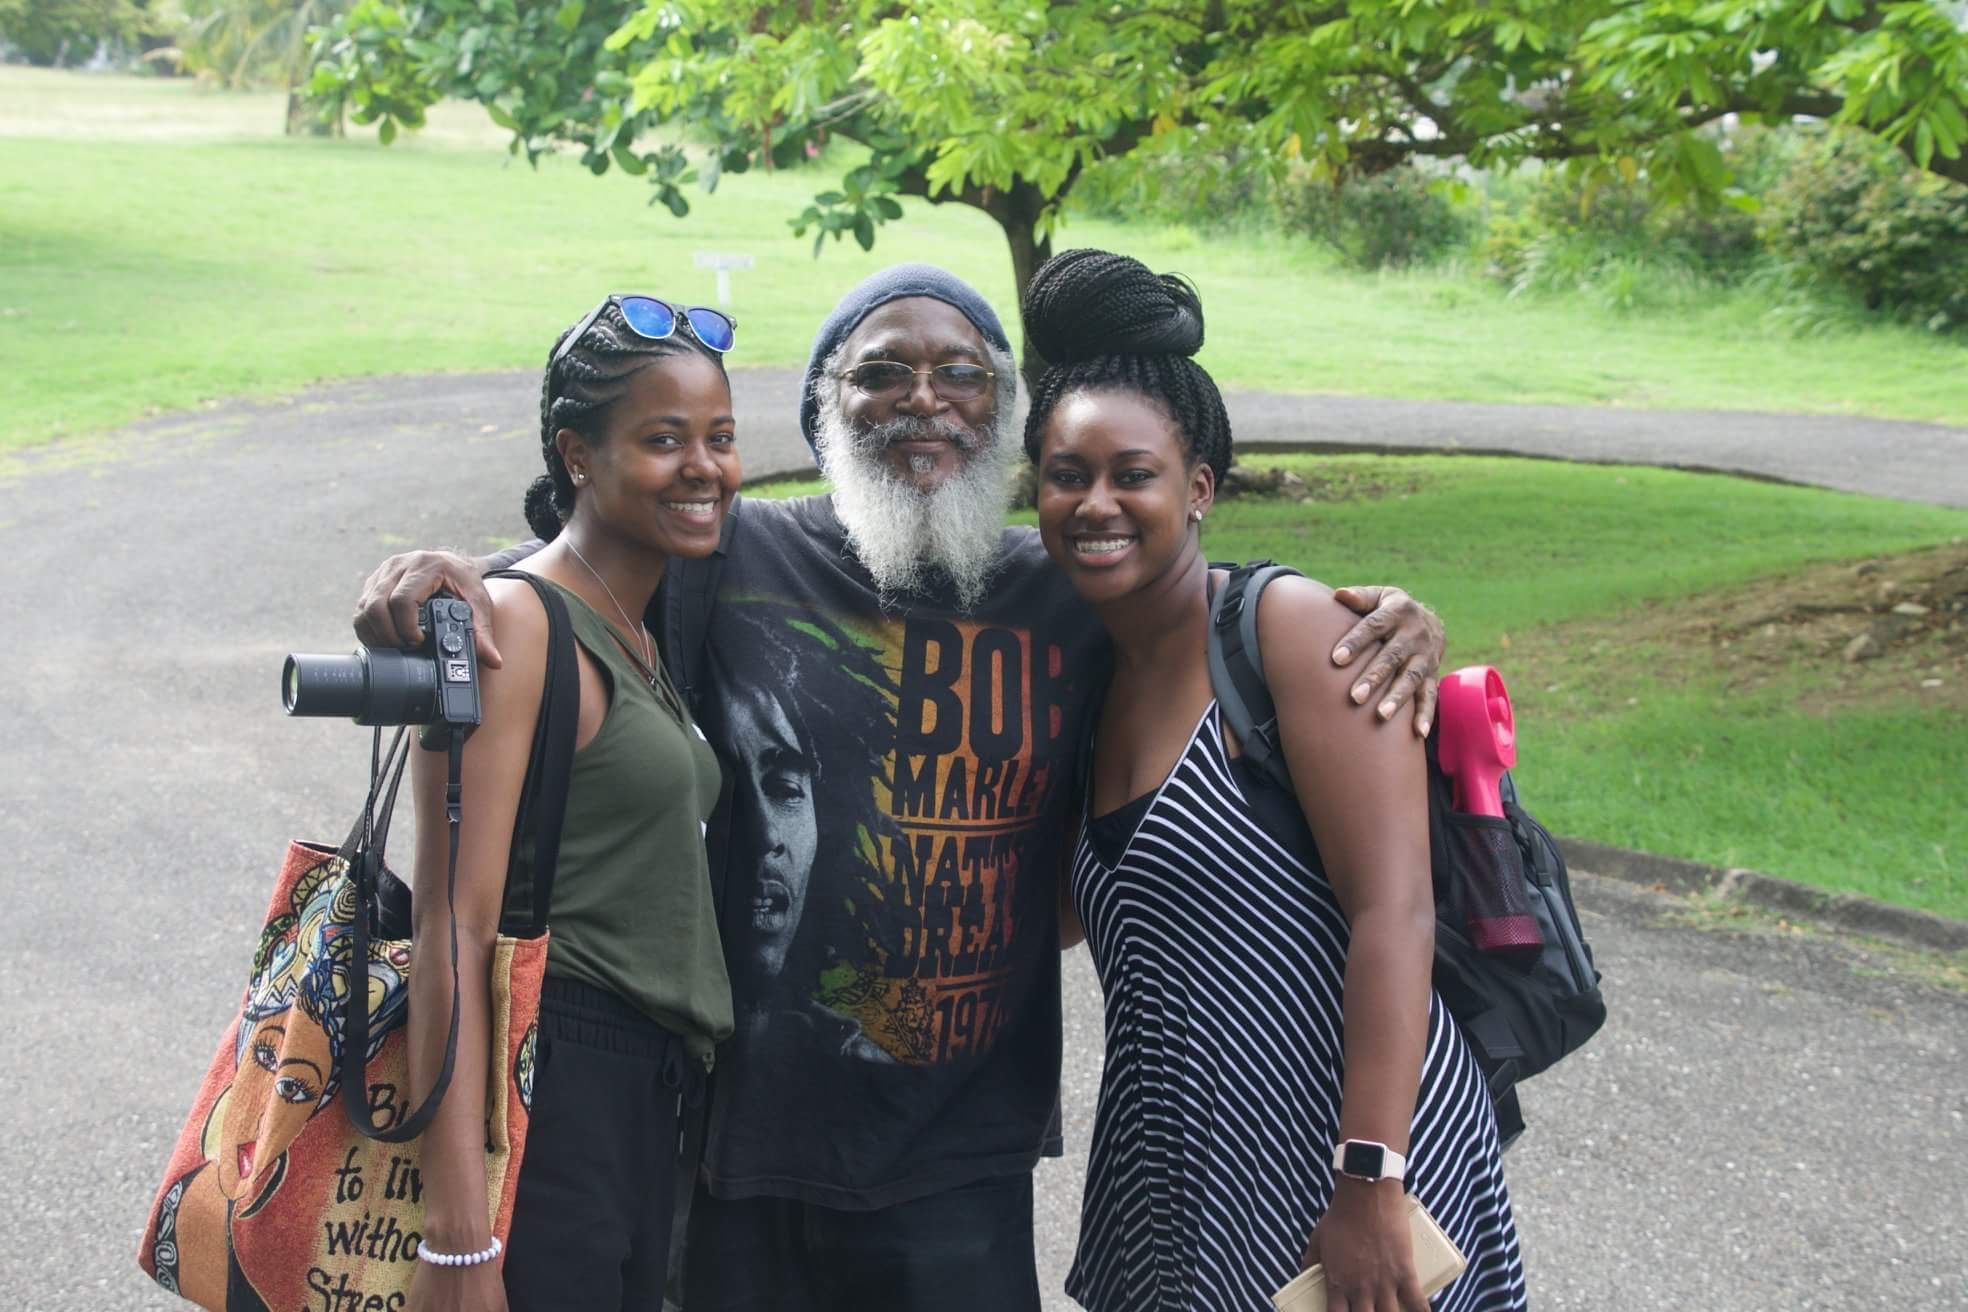 Students Monica Long and Jordan Barry pose with instructor, Dr. Clinton Hutton. Image by James D. McJunkins, Sr. Jamaica, 2018.